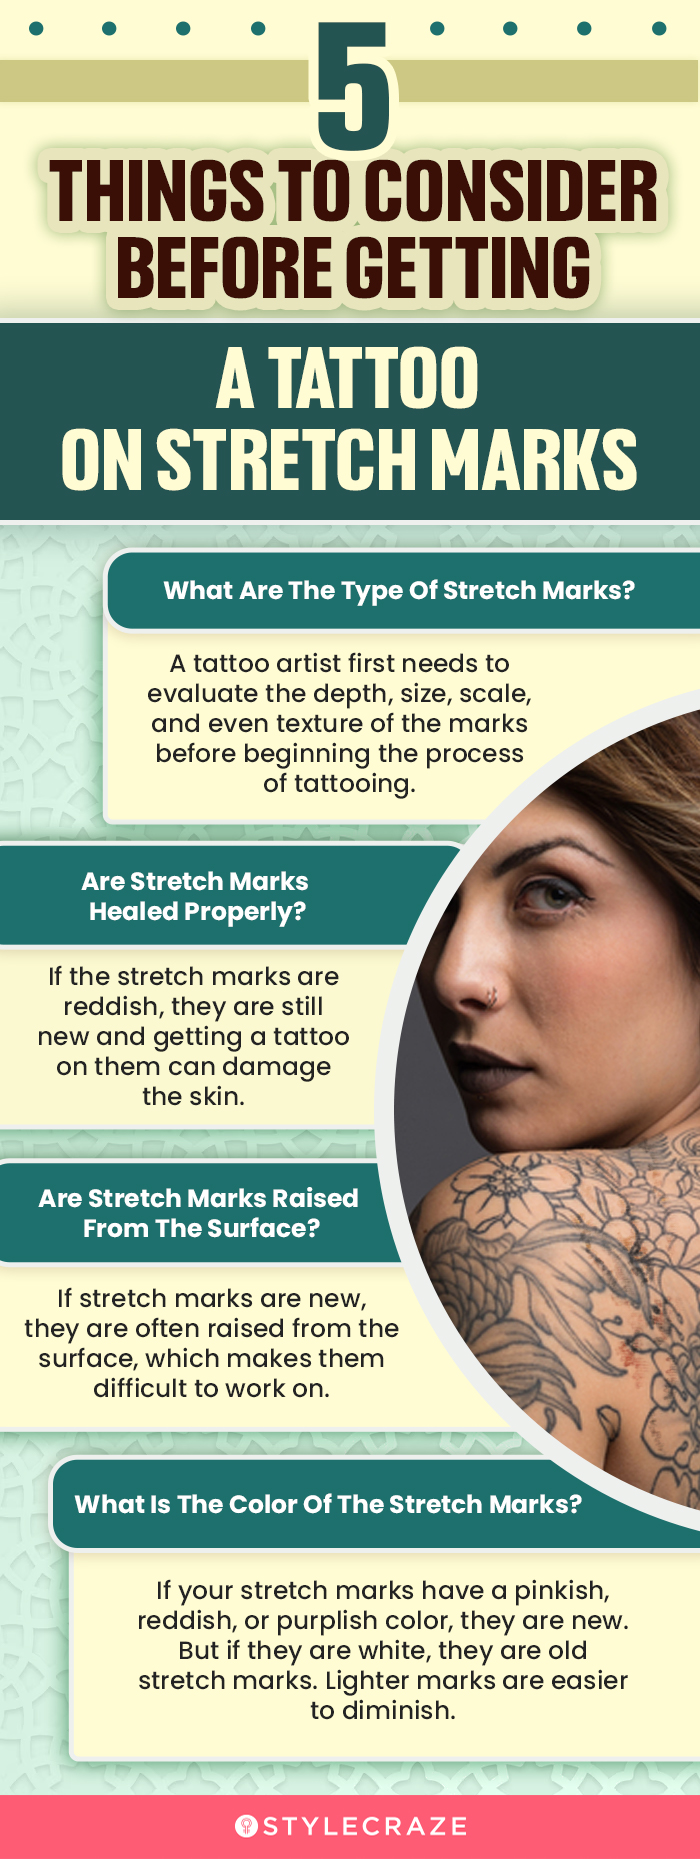 5 things to consider before getting a tattoo on stretch marks (infographic)